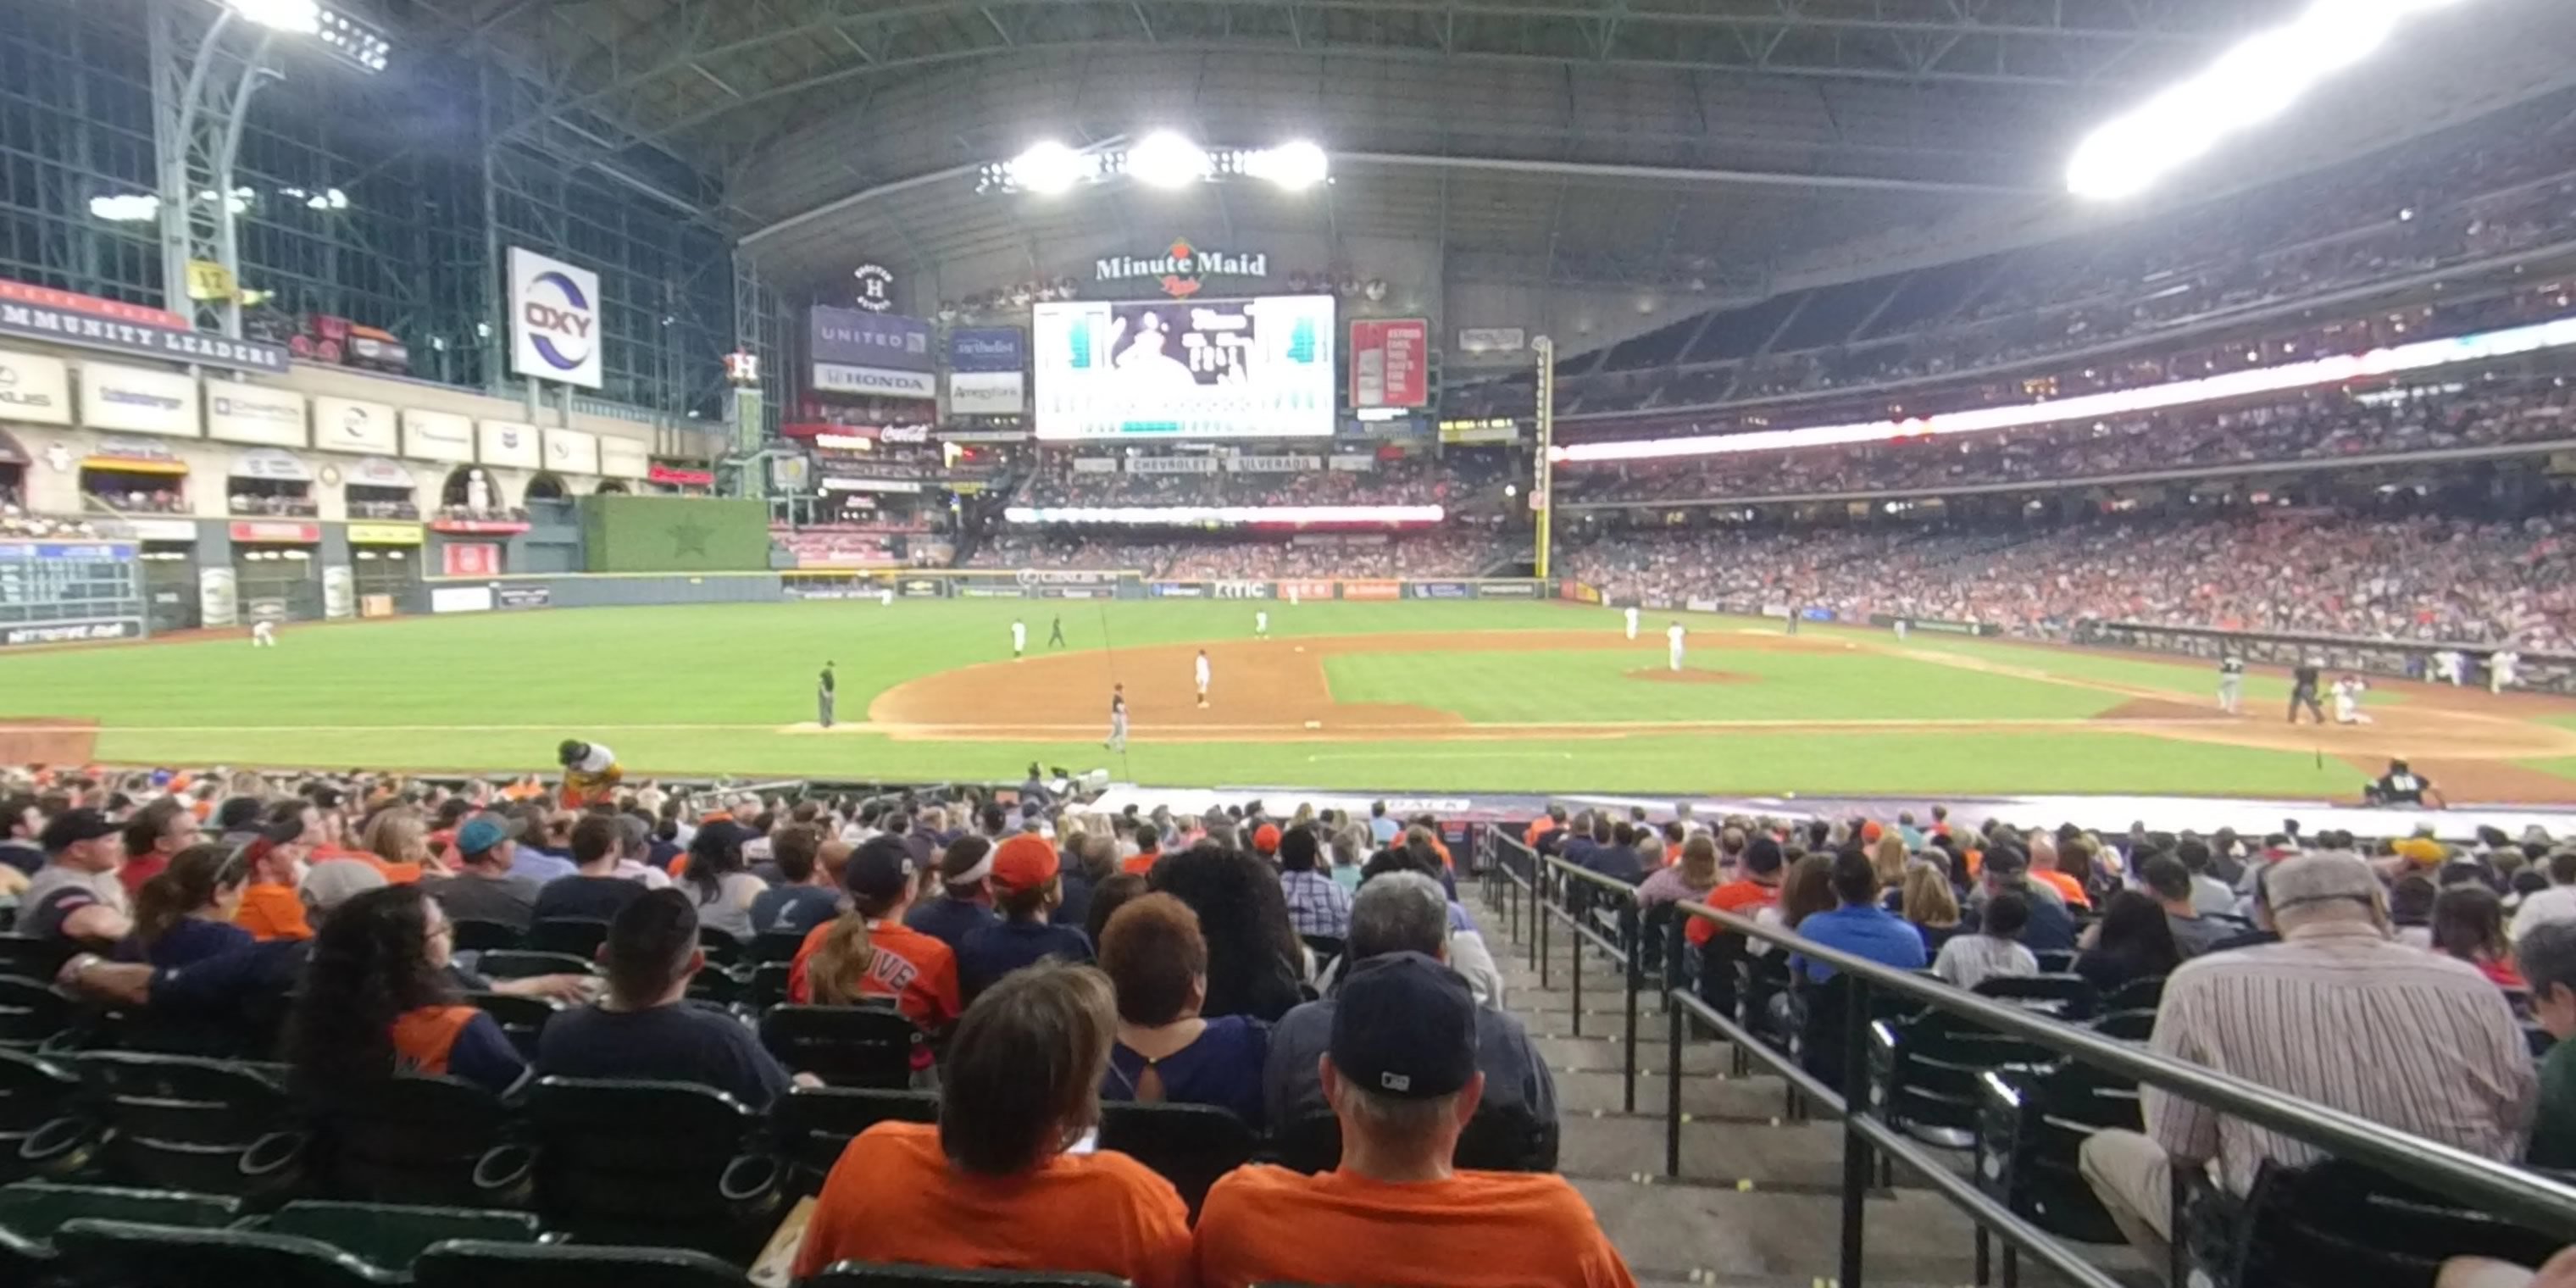 section 112 panoramic seat view  for baseball - minute maid park